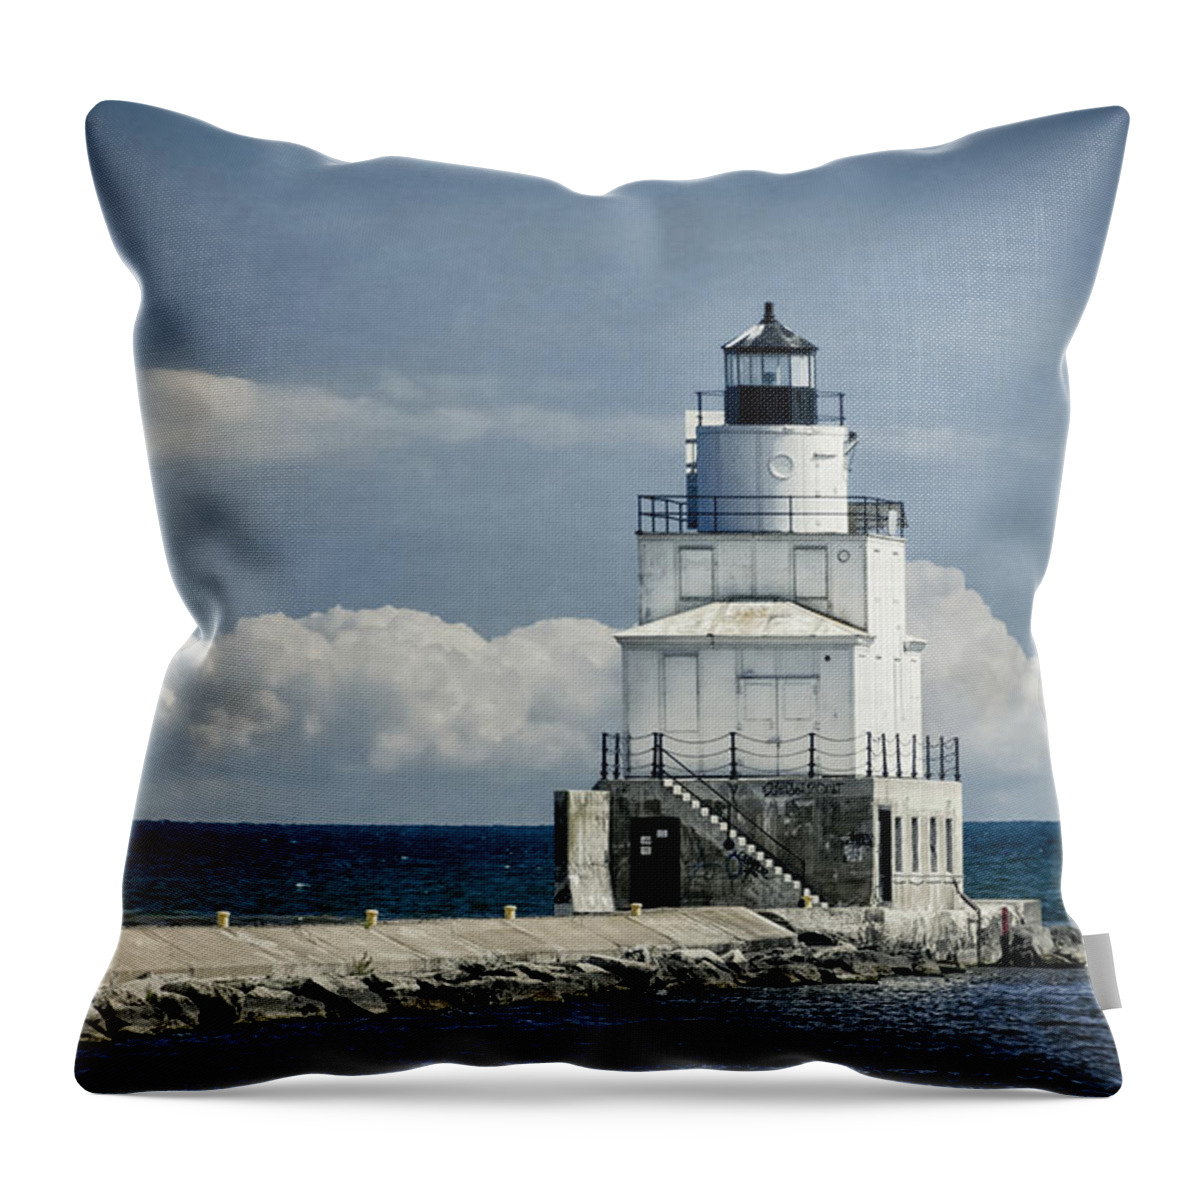 Architecture Throw Pillow featuring the photograph Manitowoc Breakwater Lighthouse by Joan Carroll